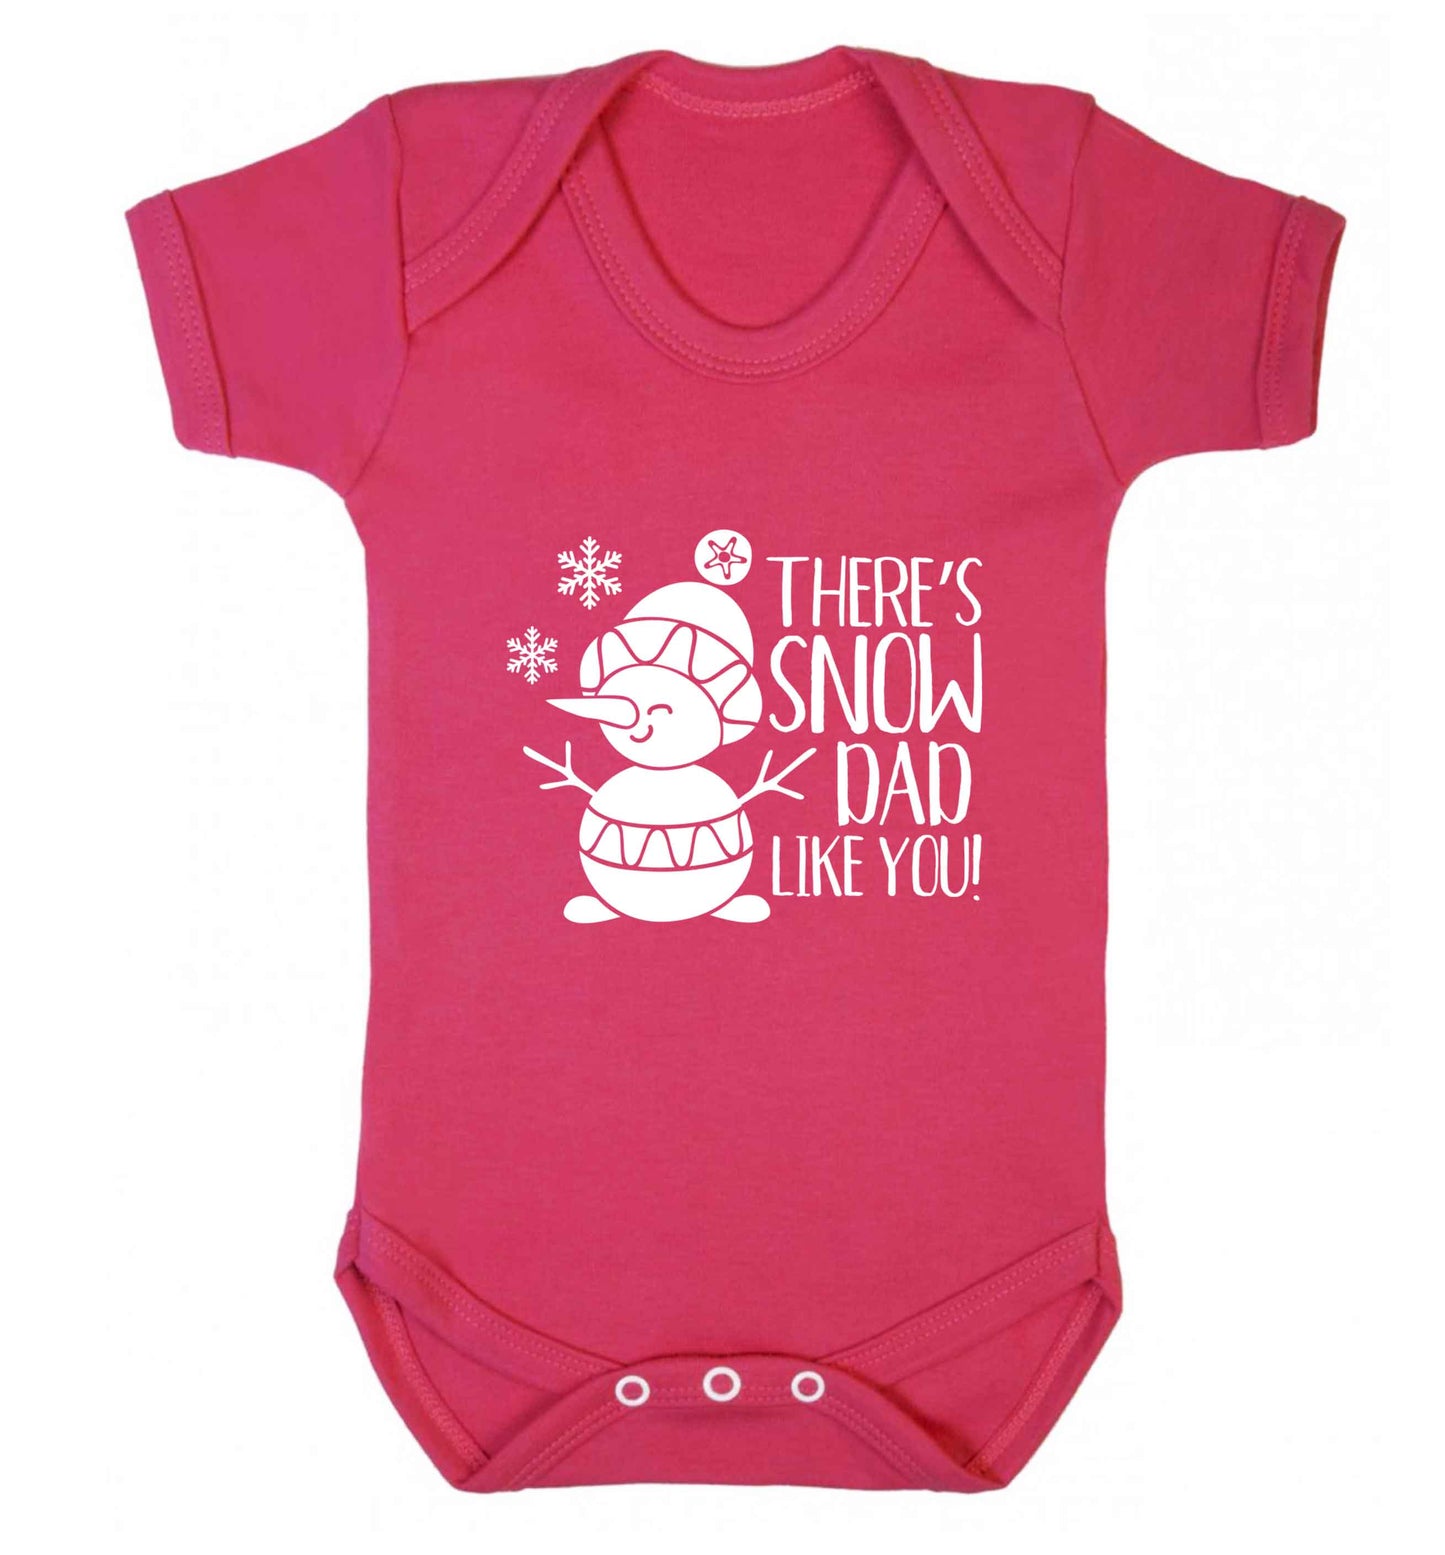 There's snow dad like you baby vest dark pink 18-24 months